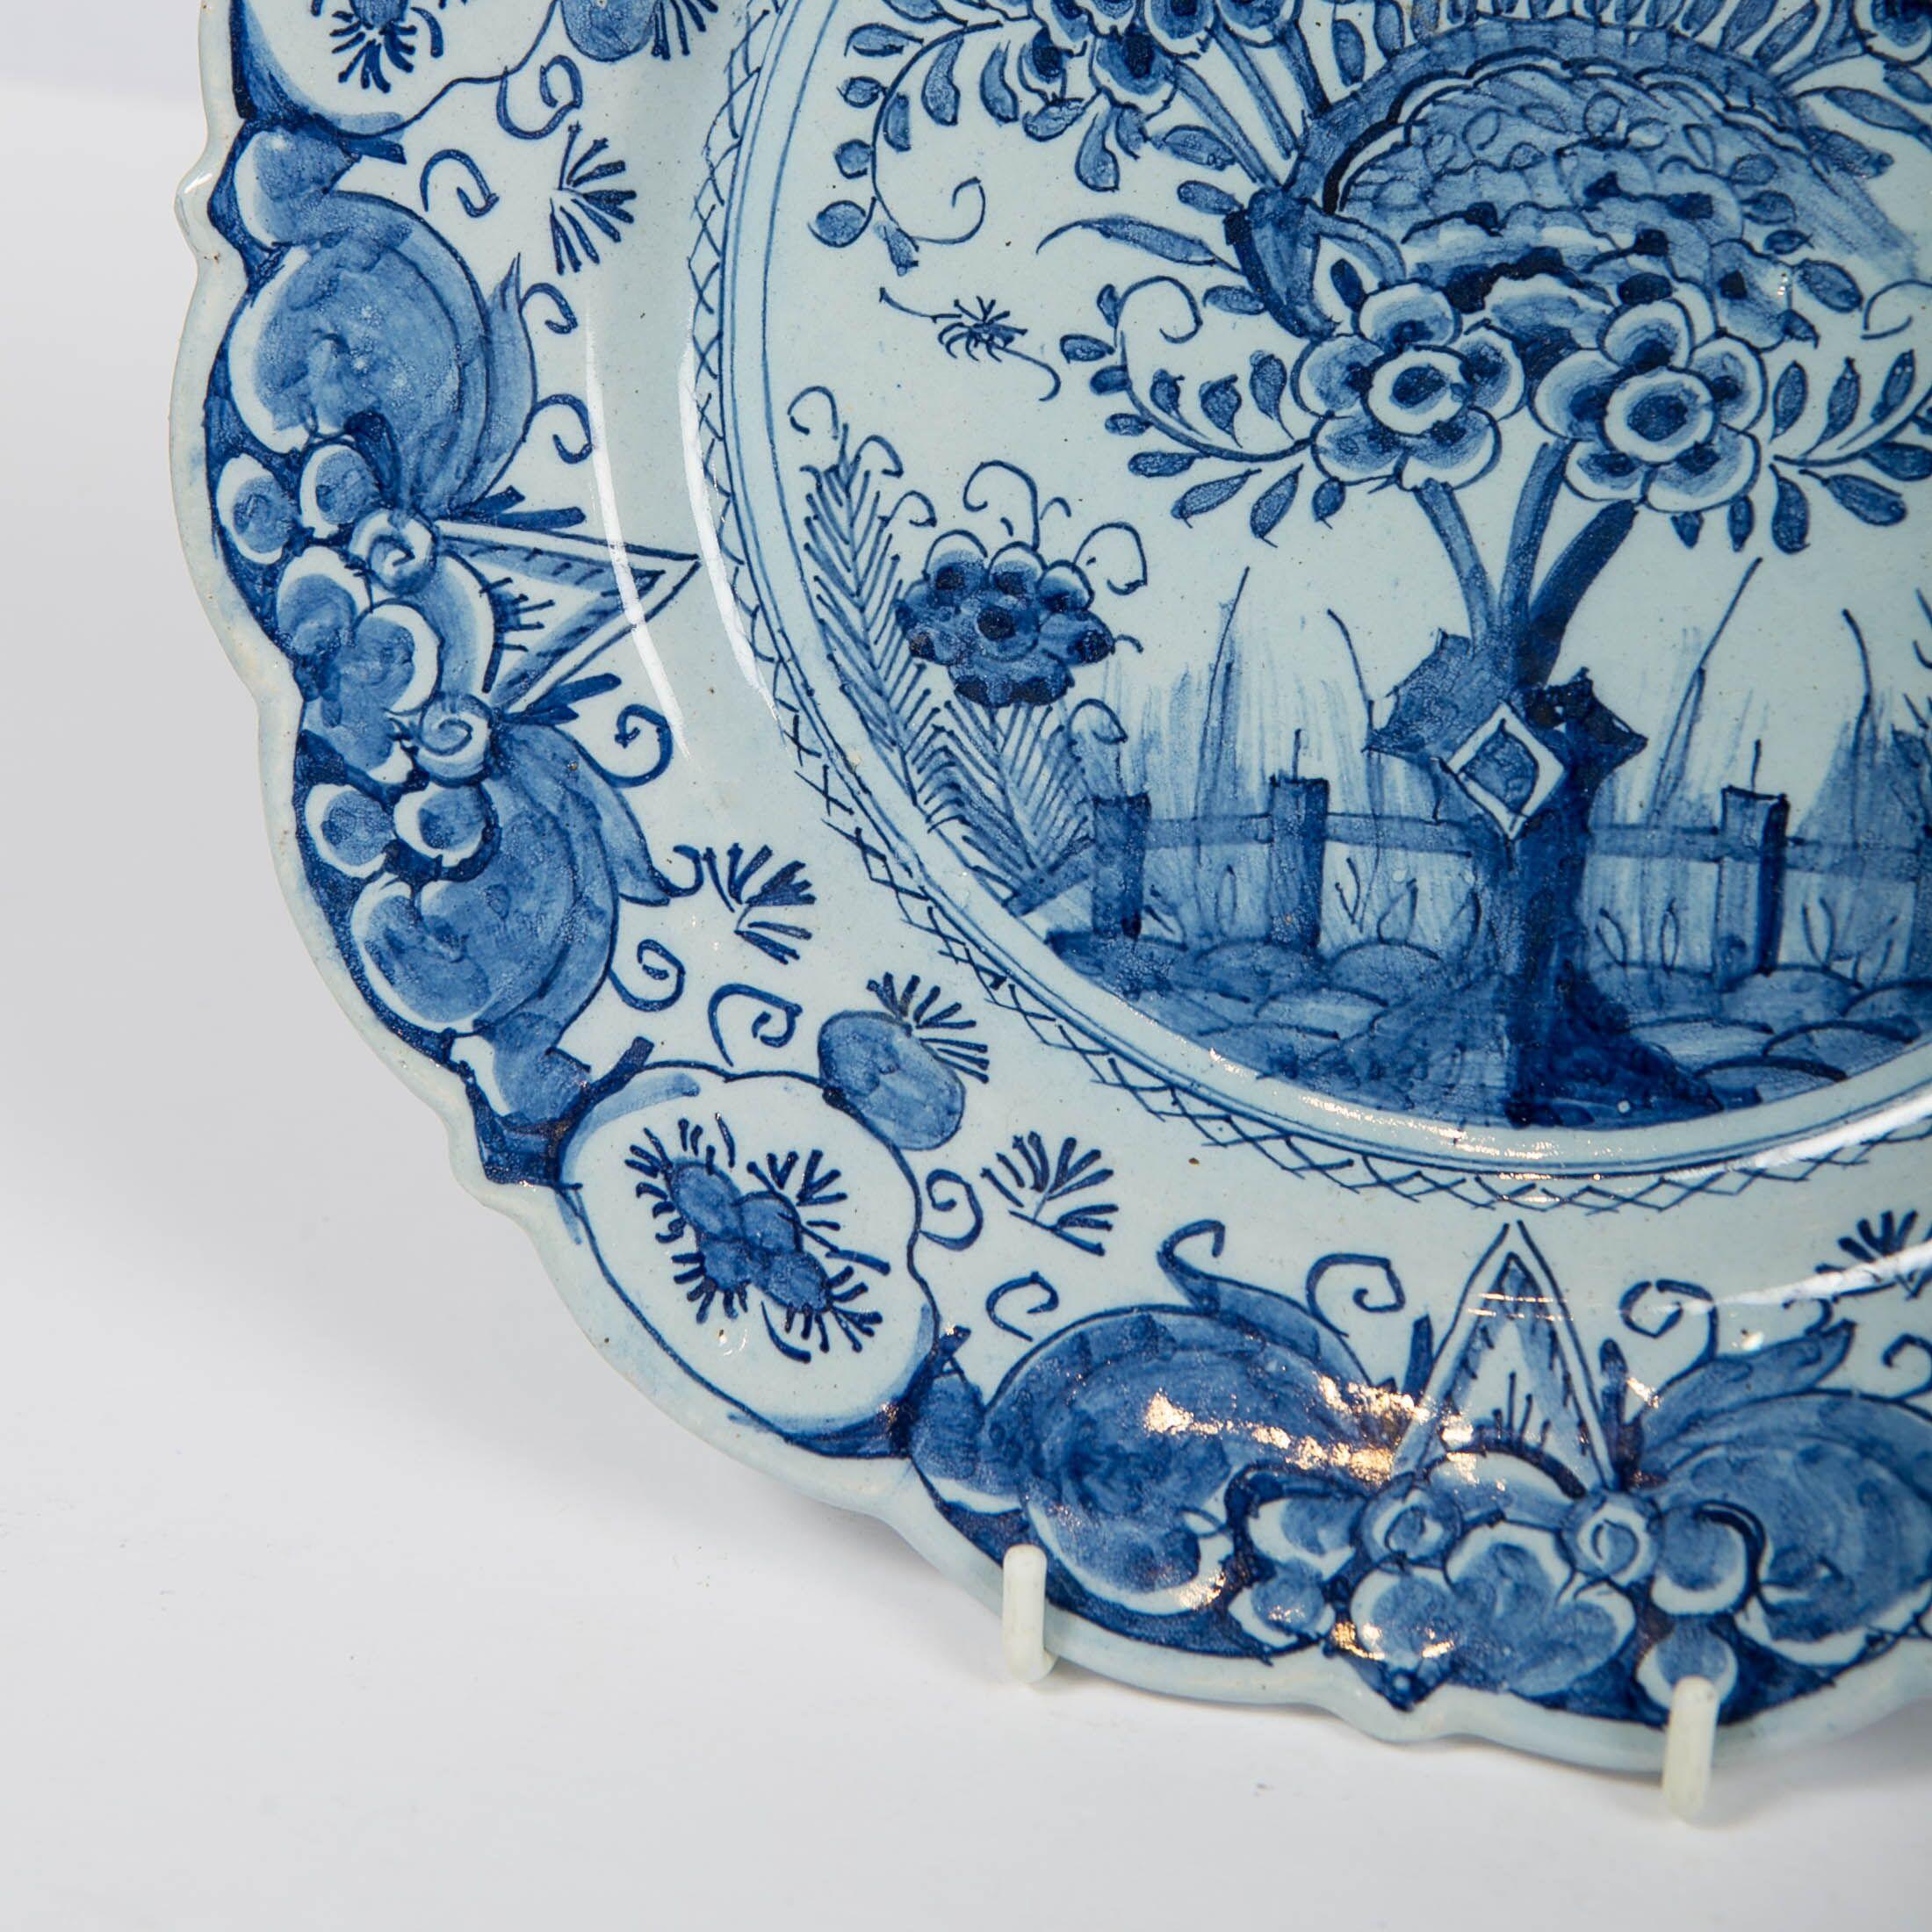 Hand-Painted Delft Blue and White Charger Hand Painted Made by De Bijl 'The Axe', circa 1770